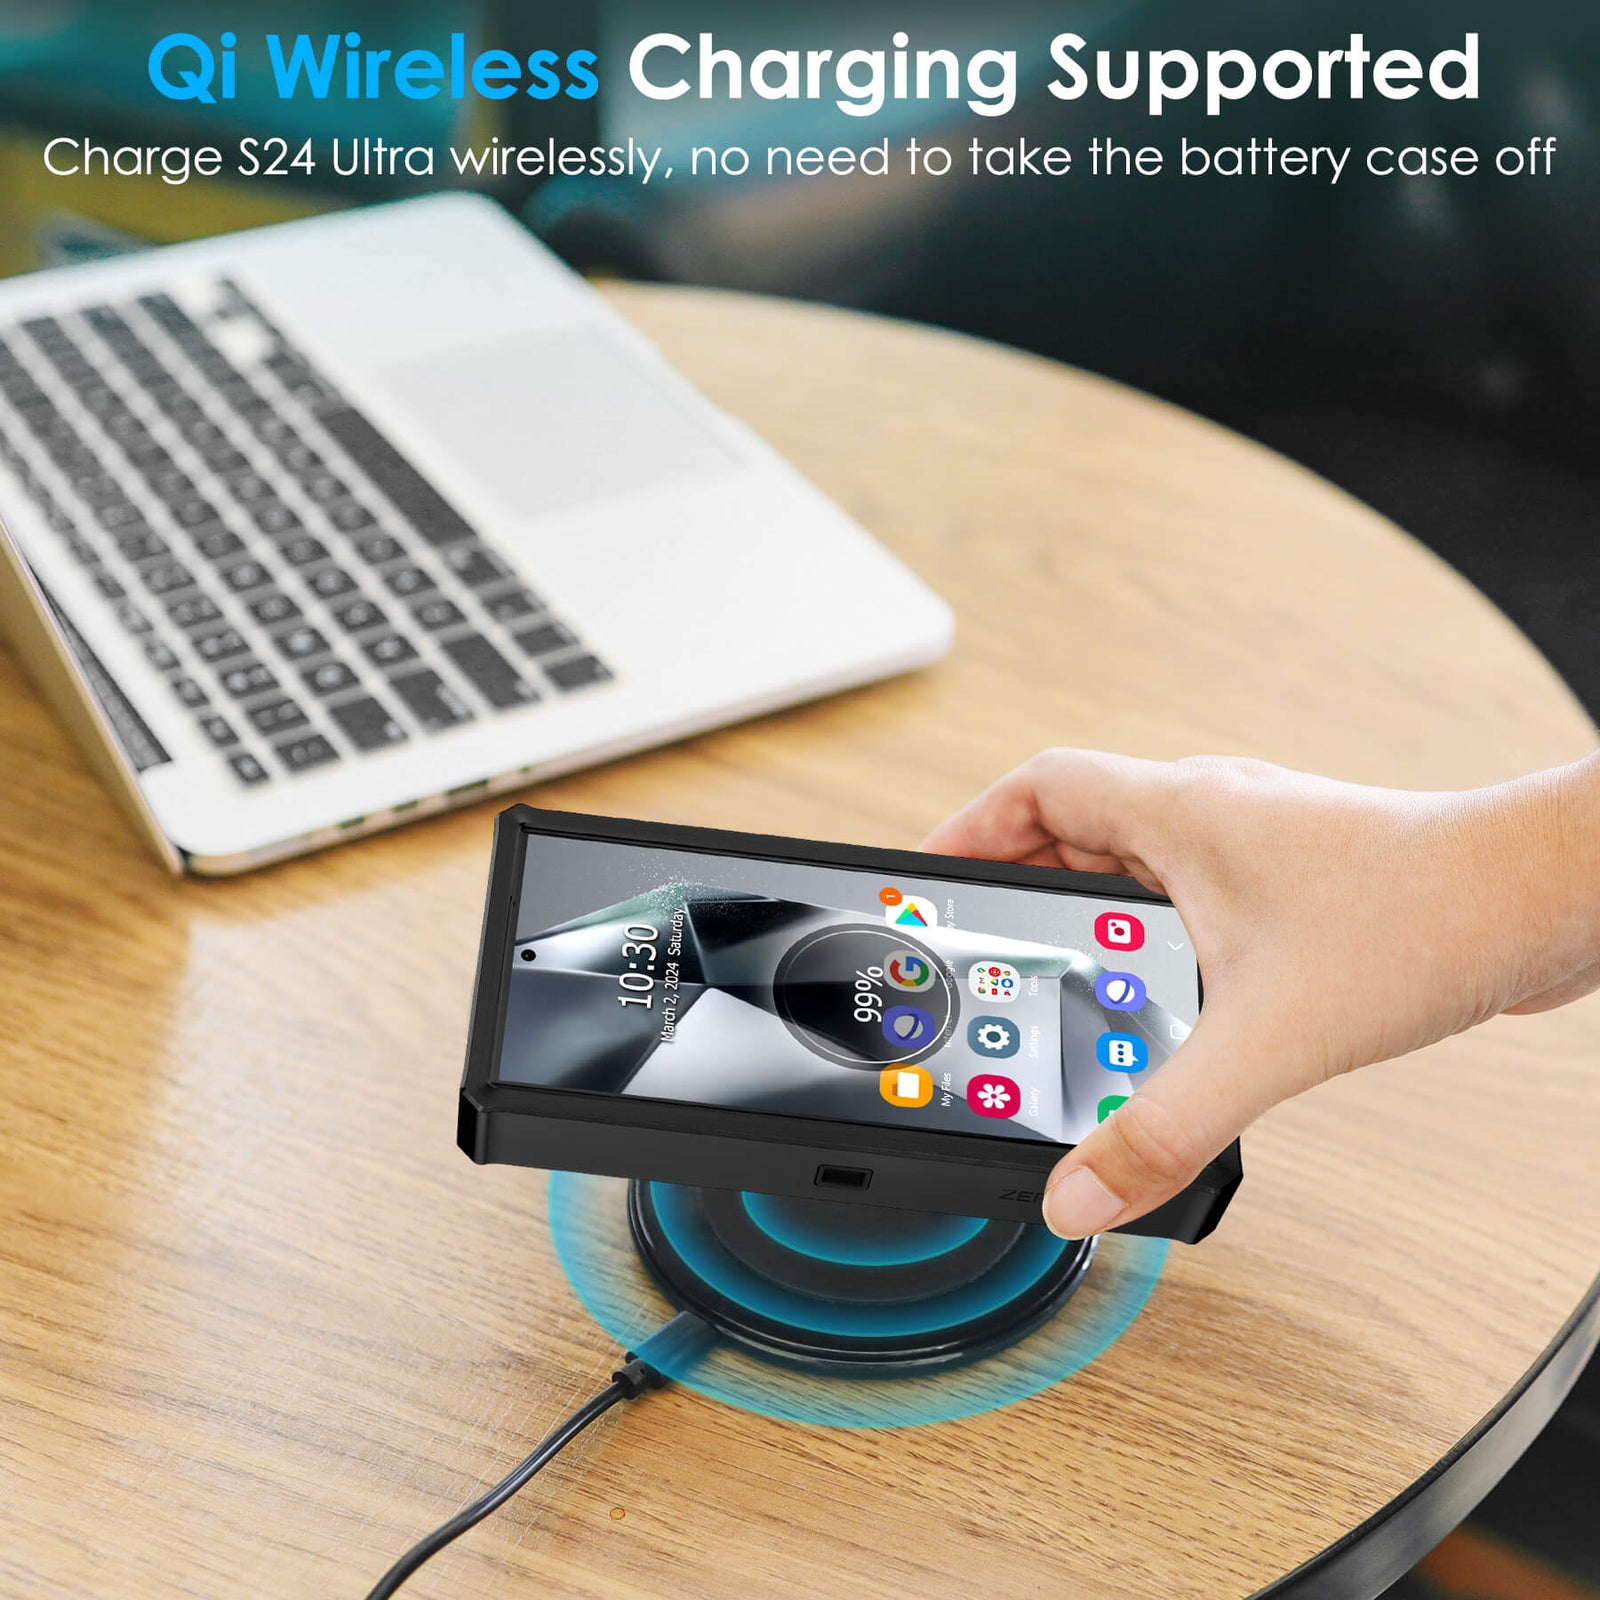 Wireless charging supported